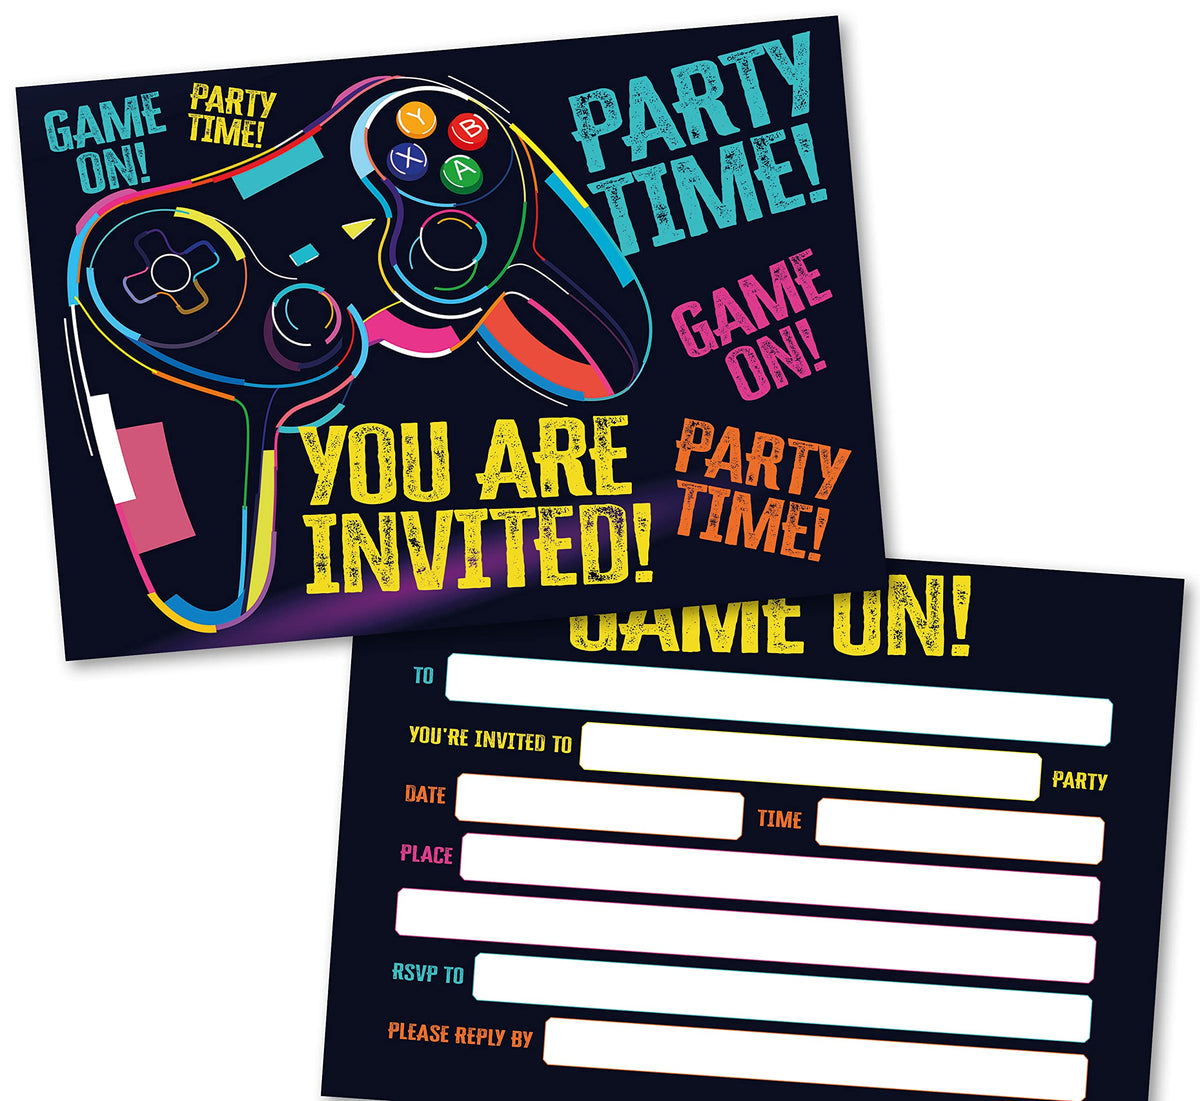 Absolutely Yours Party Invitations Pack of 36. Gaming themed invitation with matching envelopes. 120 x 172mm. Party Invites, Birthday Party Invitations. Designed and Printed in UK.